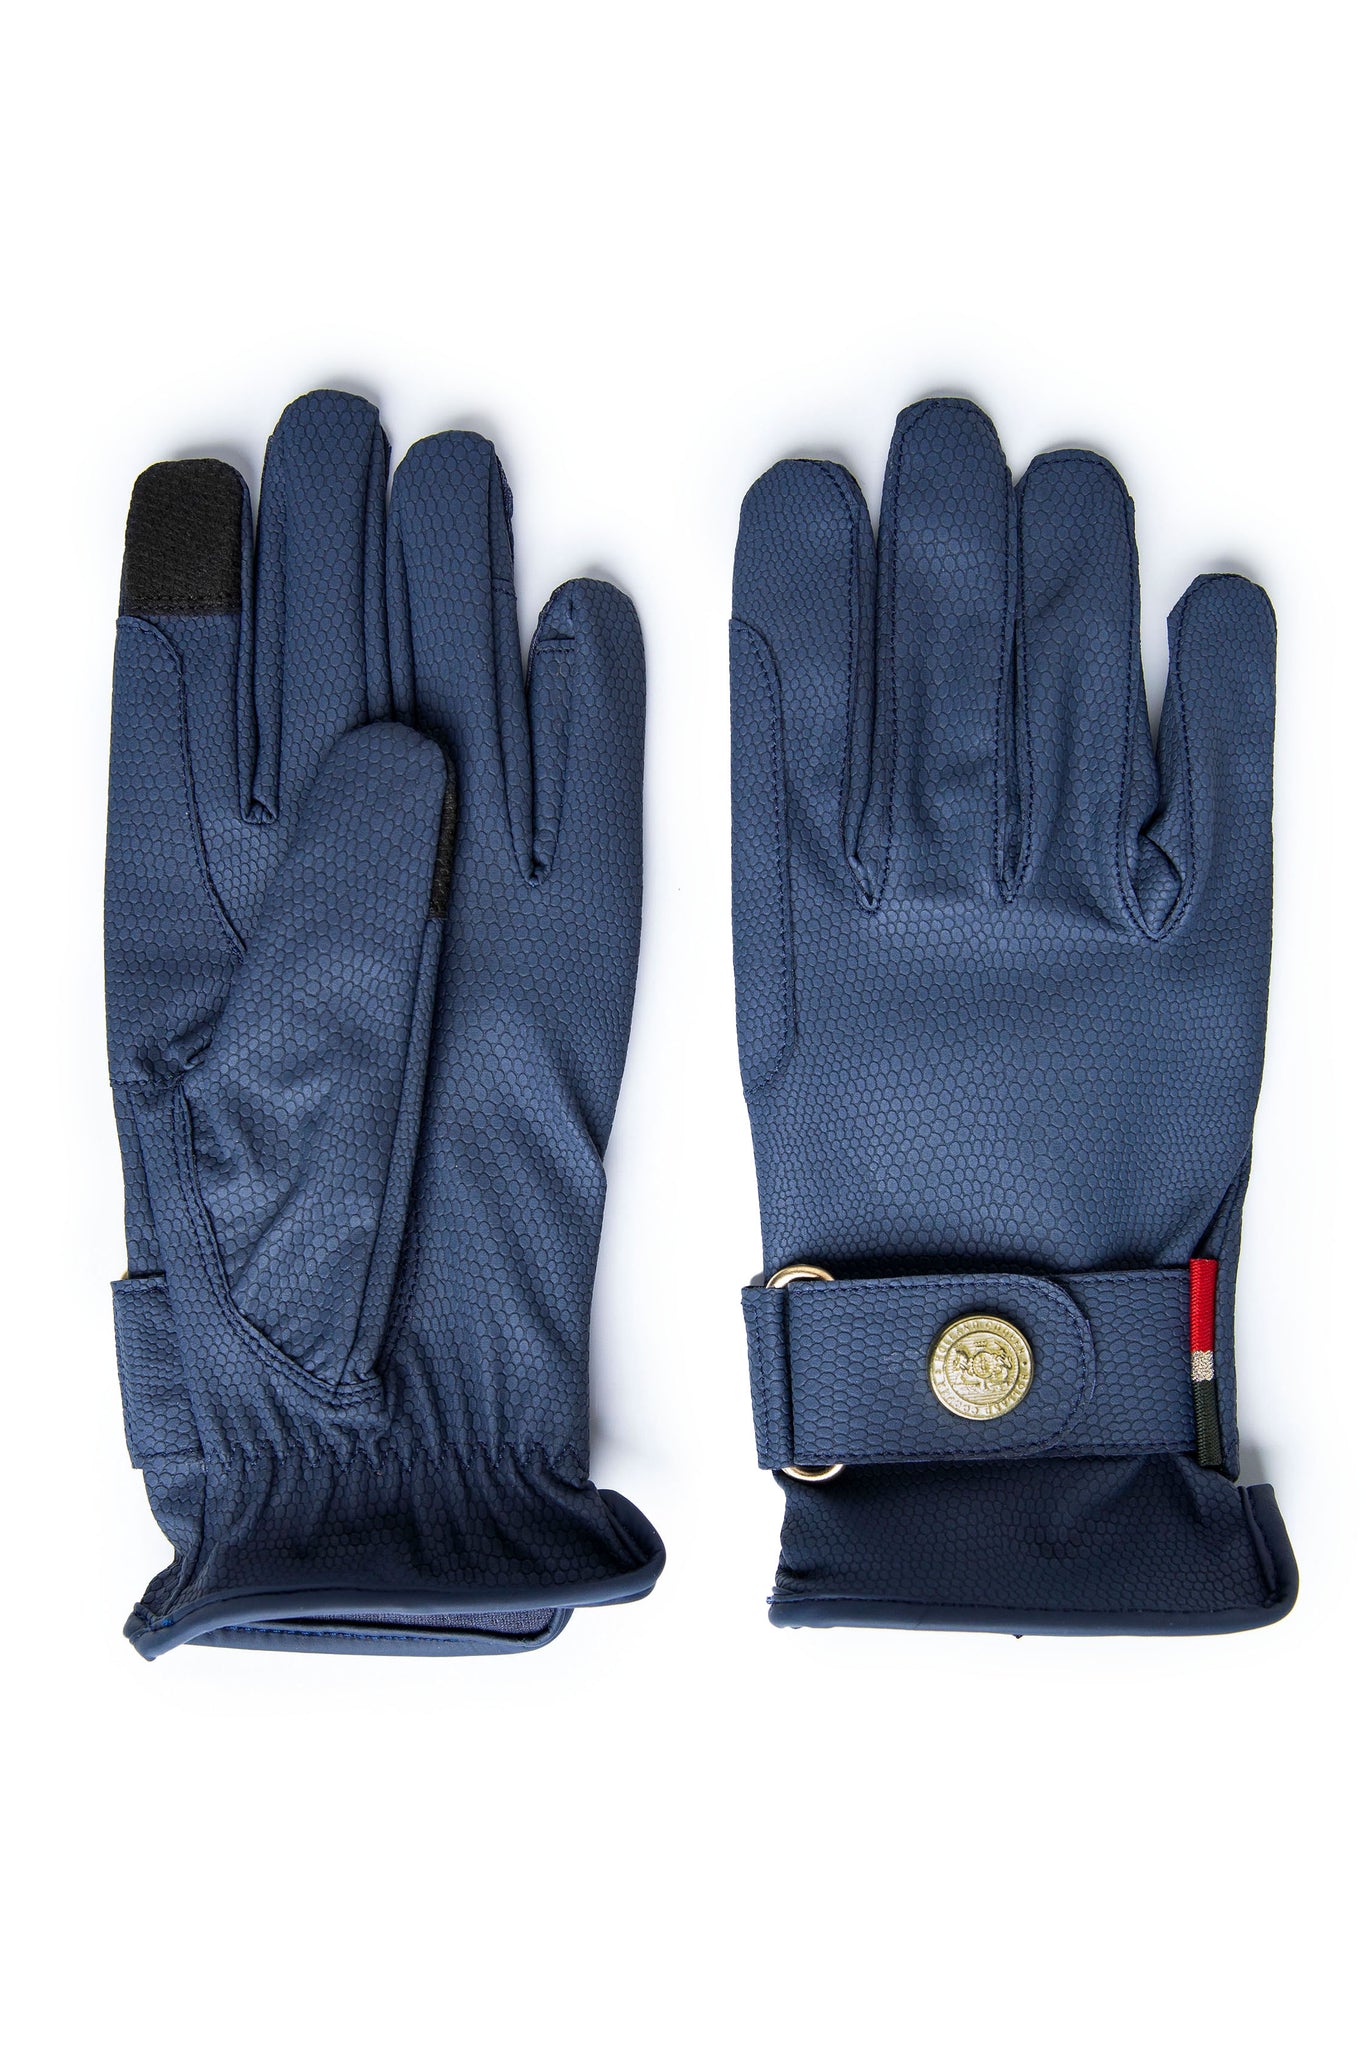 The Findley Set (Navy)